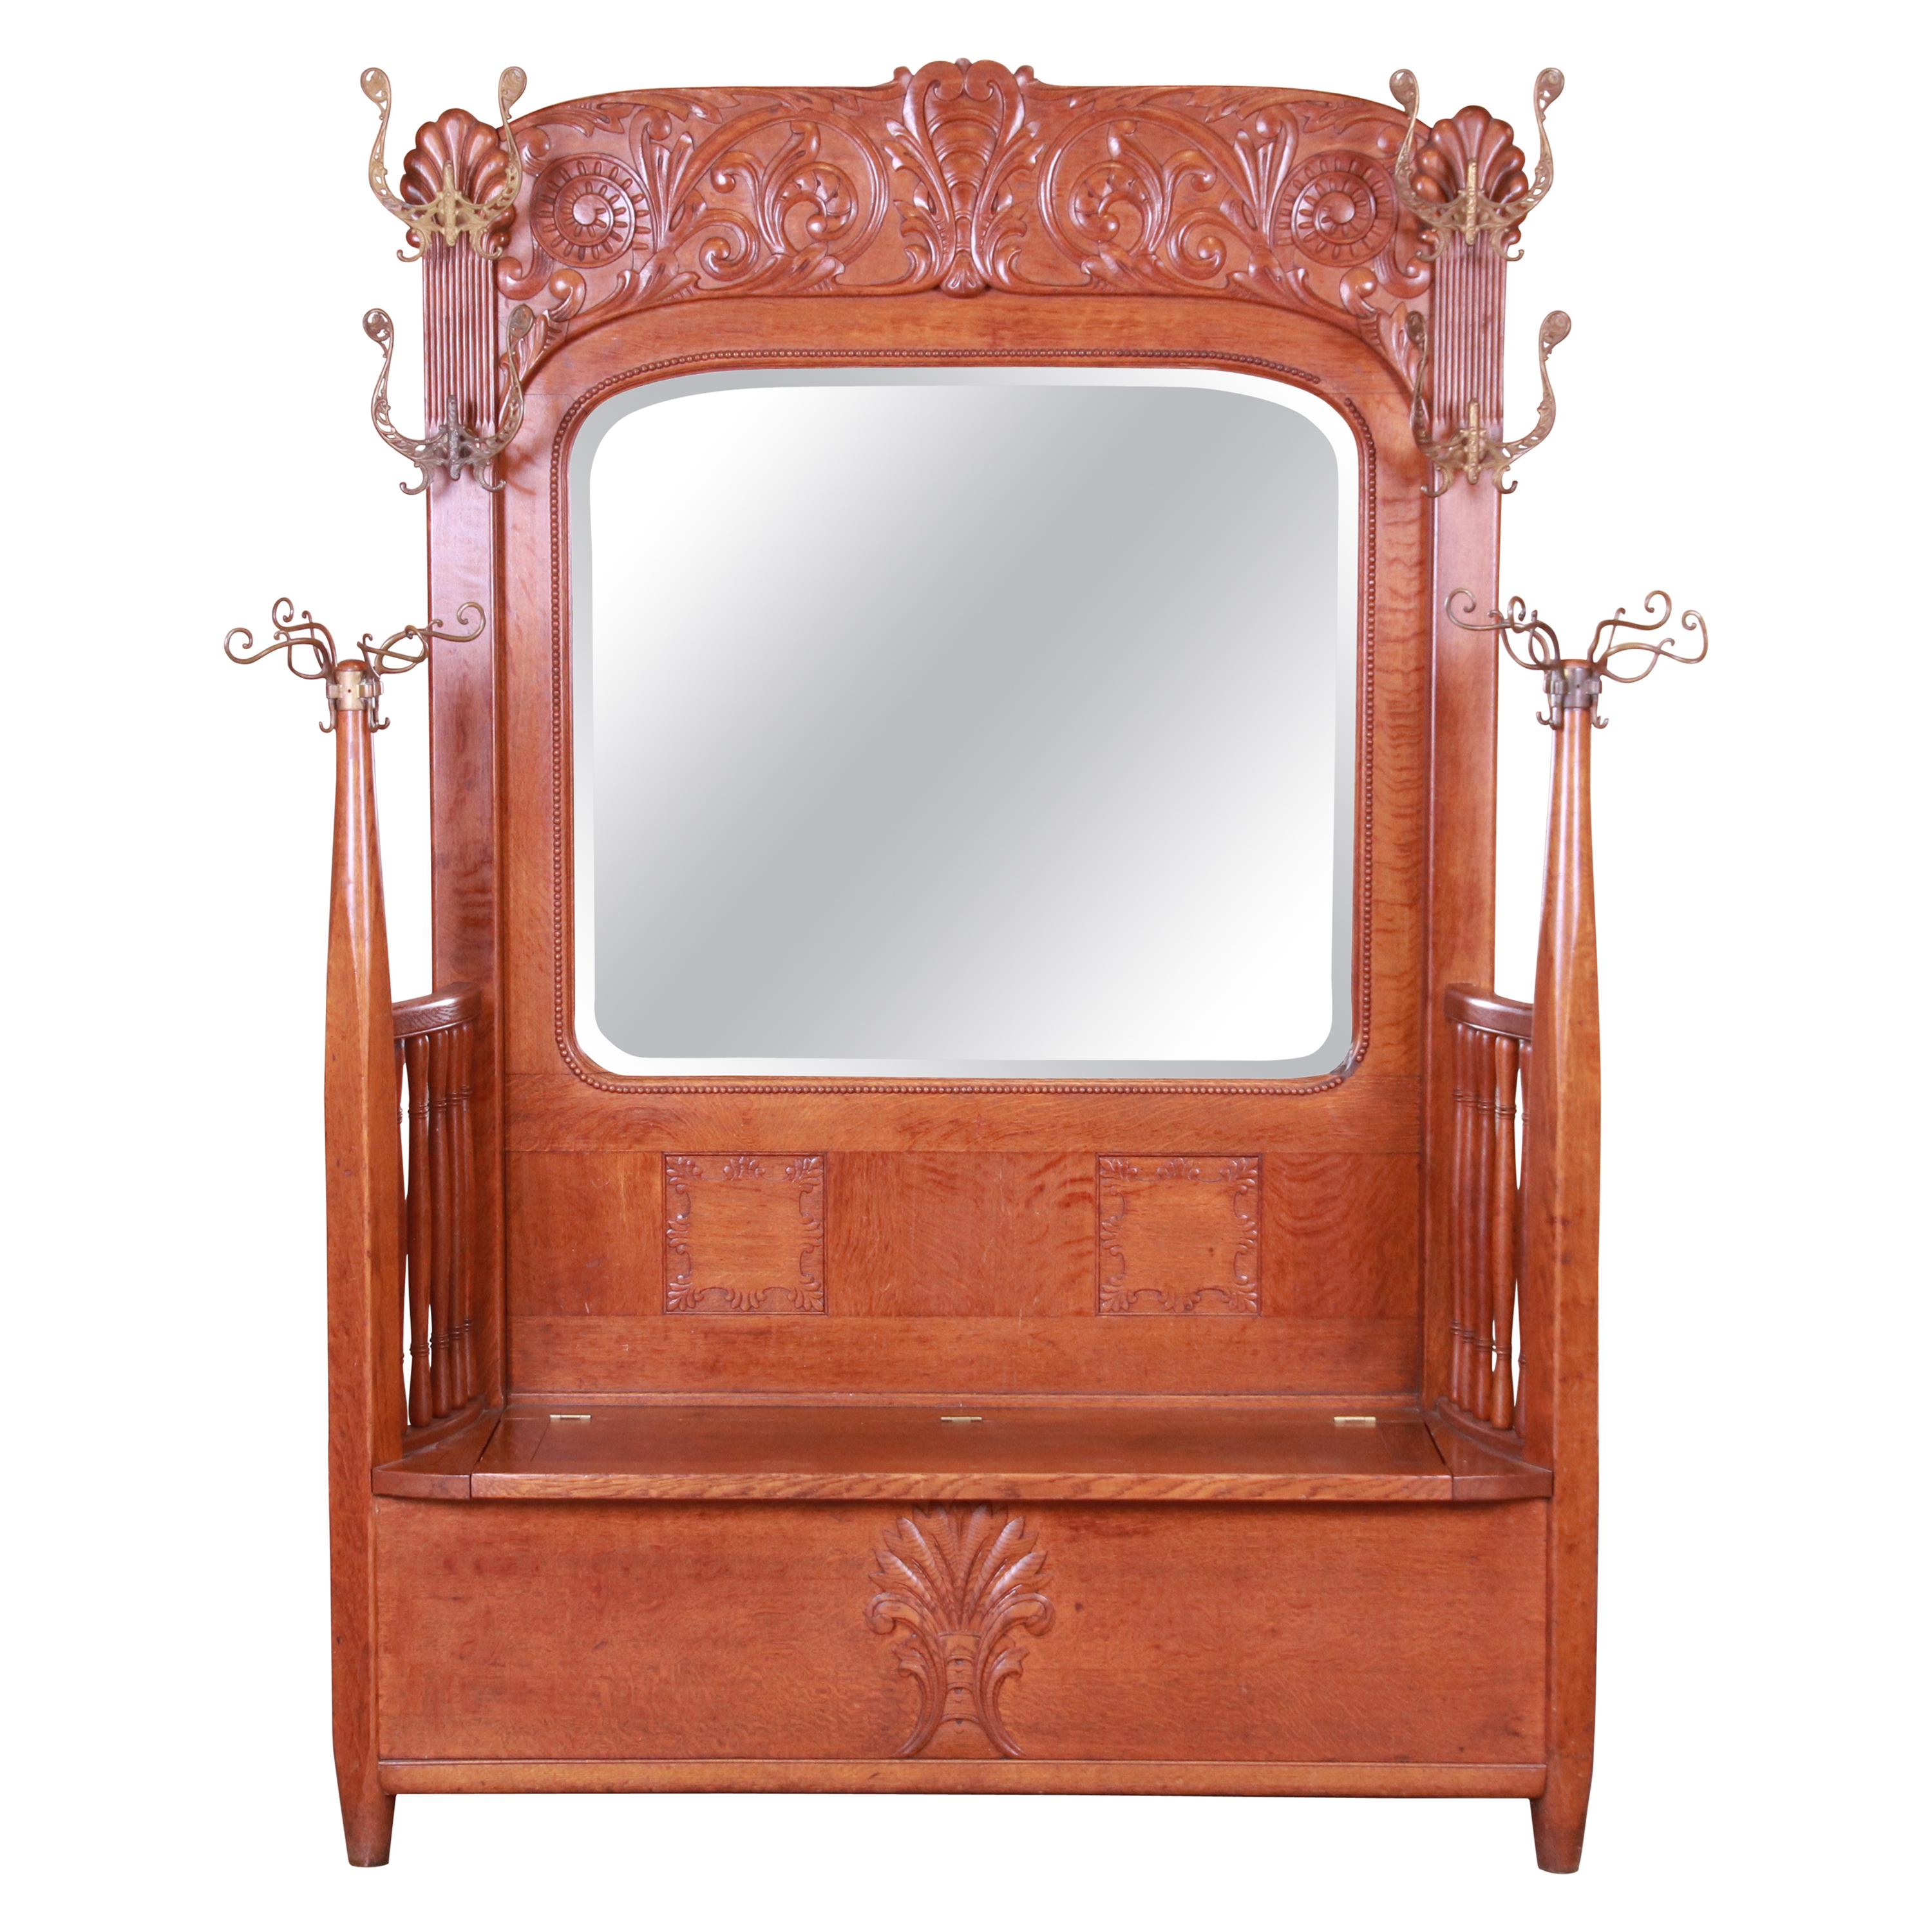 R. J. Horner Carved Solid Oak Hall Bench with Mirror, circa 1890